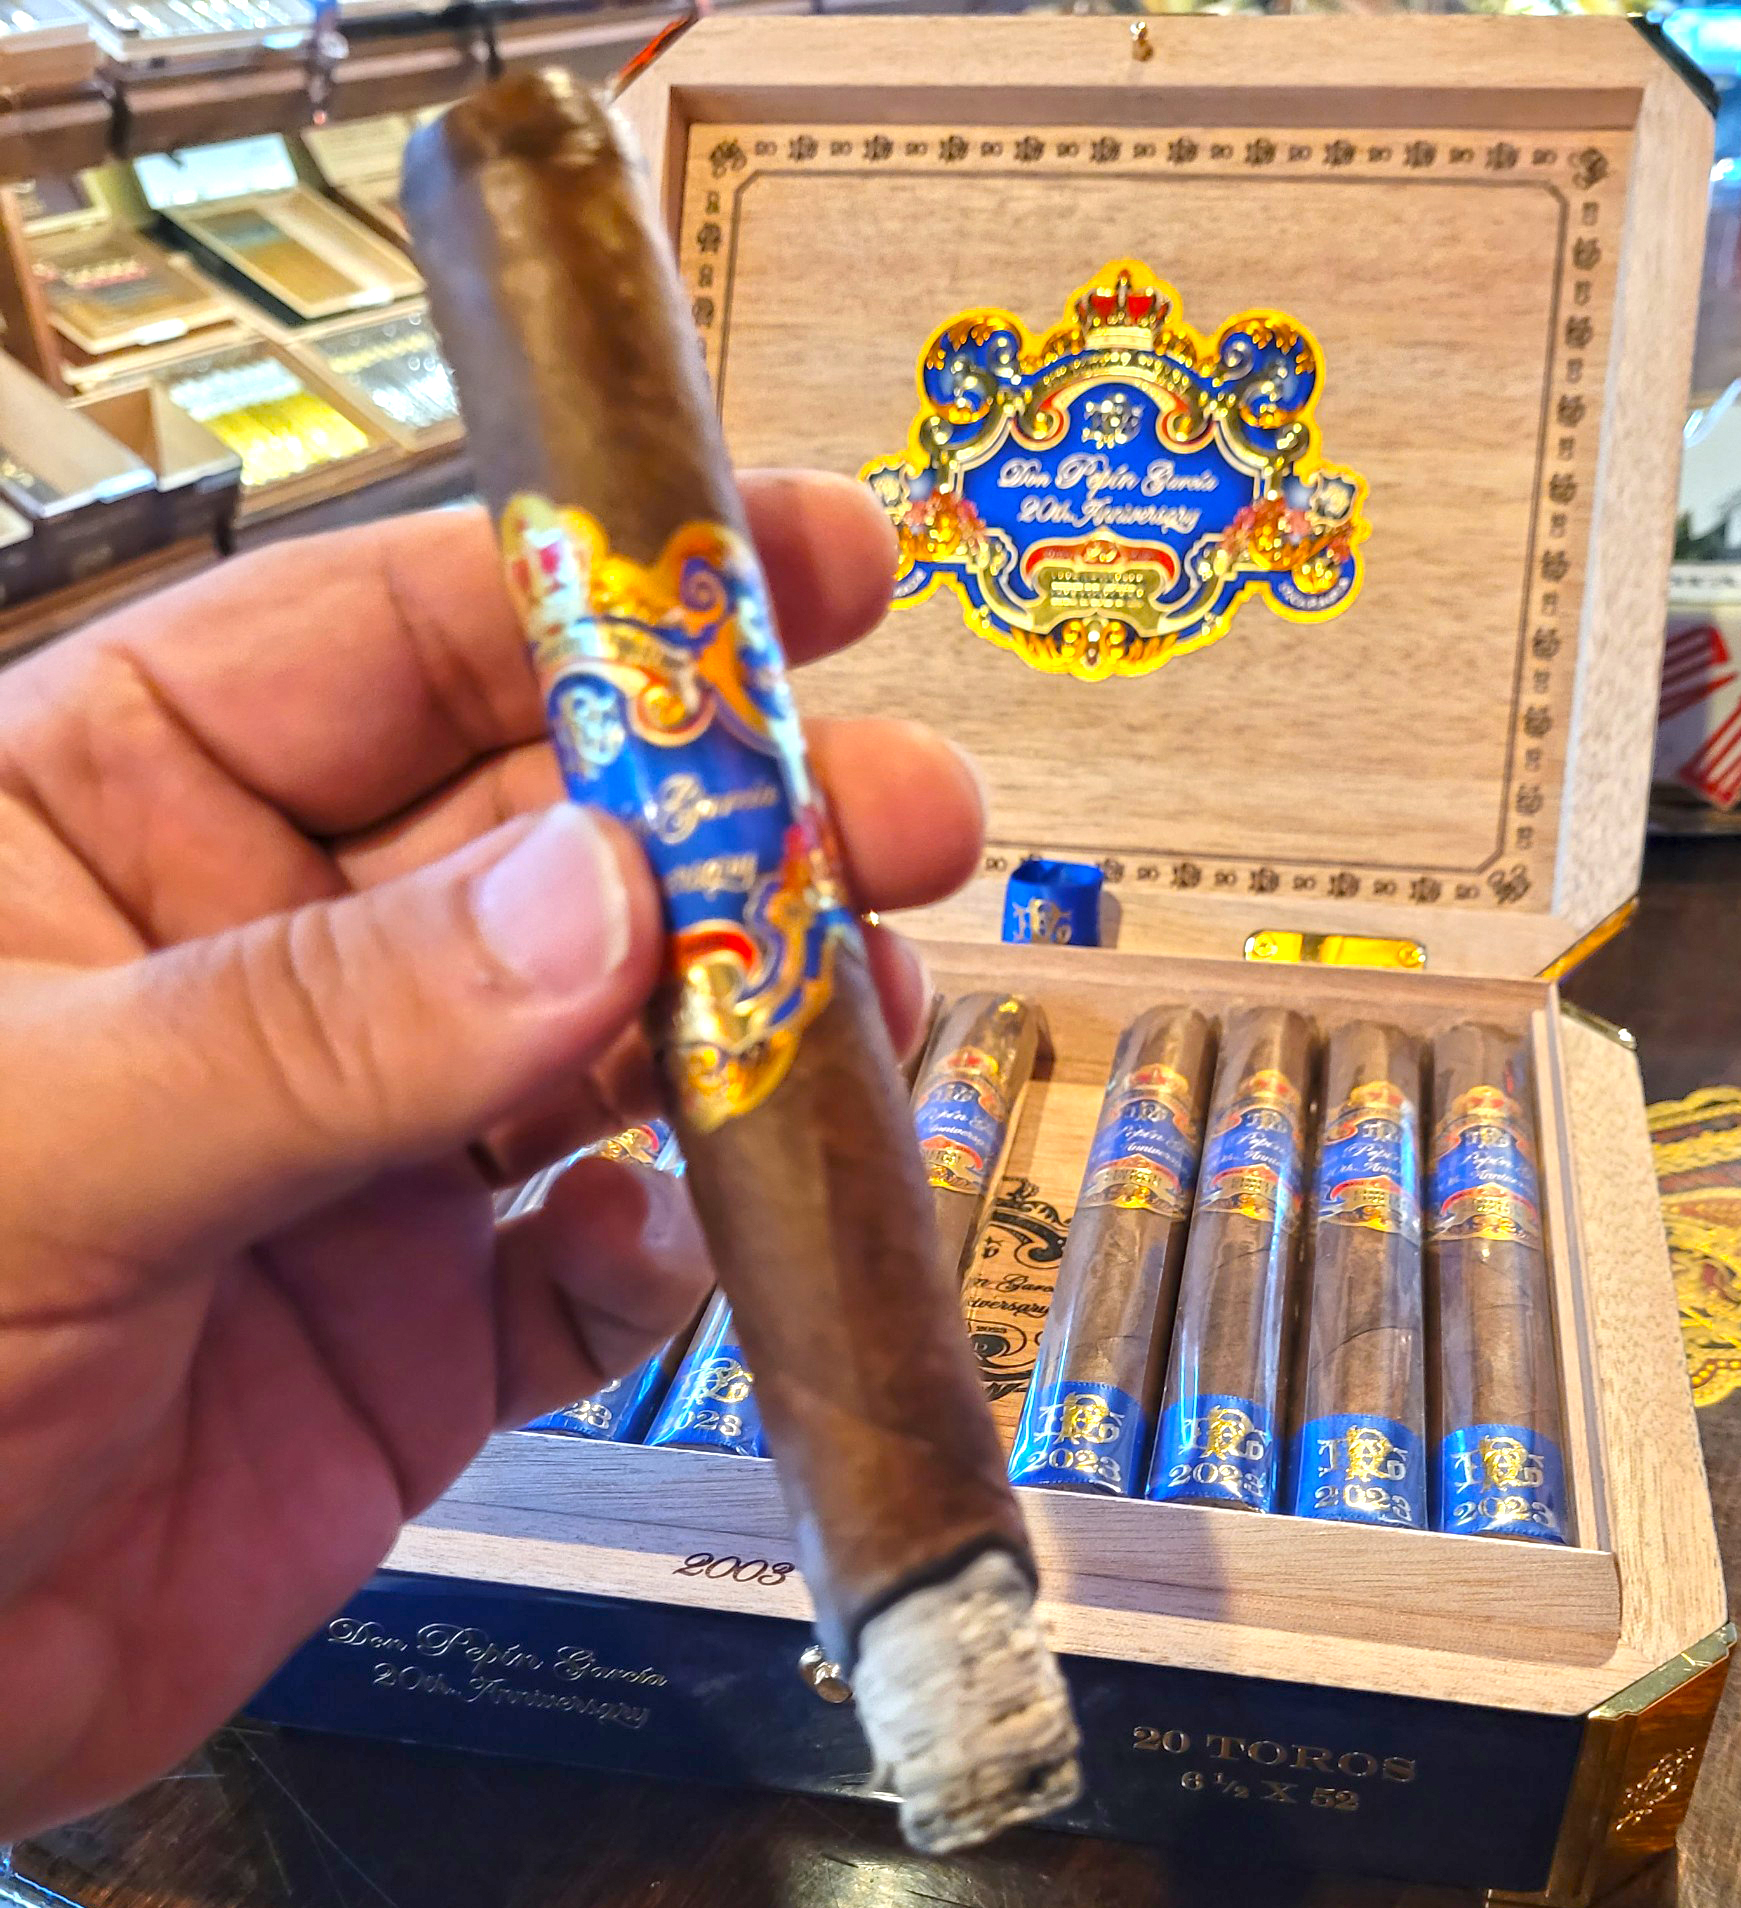 A Don Pepín García 20th Anniversary Limited Edition cigar, with its rich and complex flavors